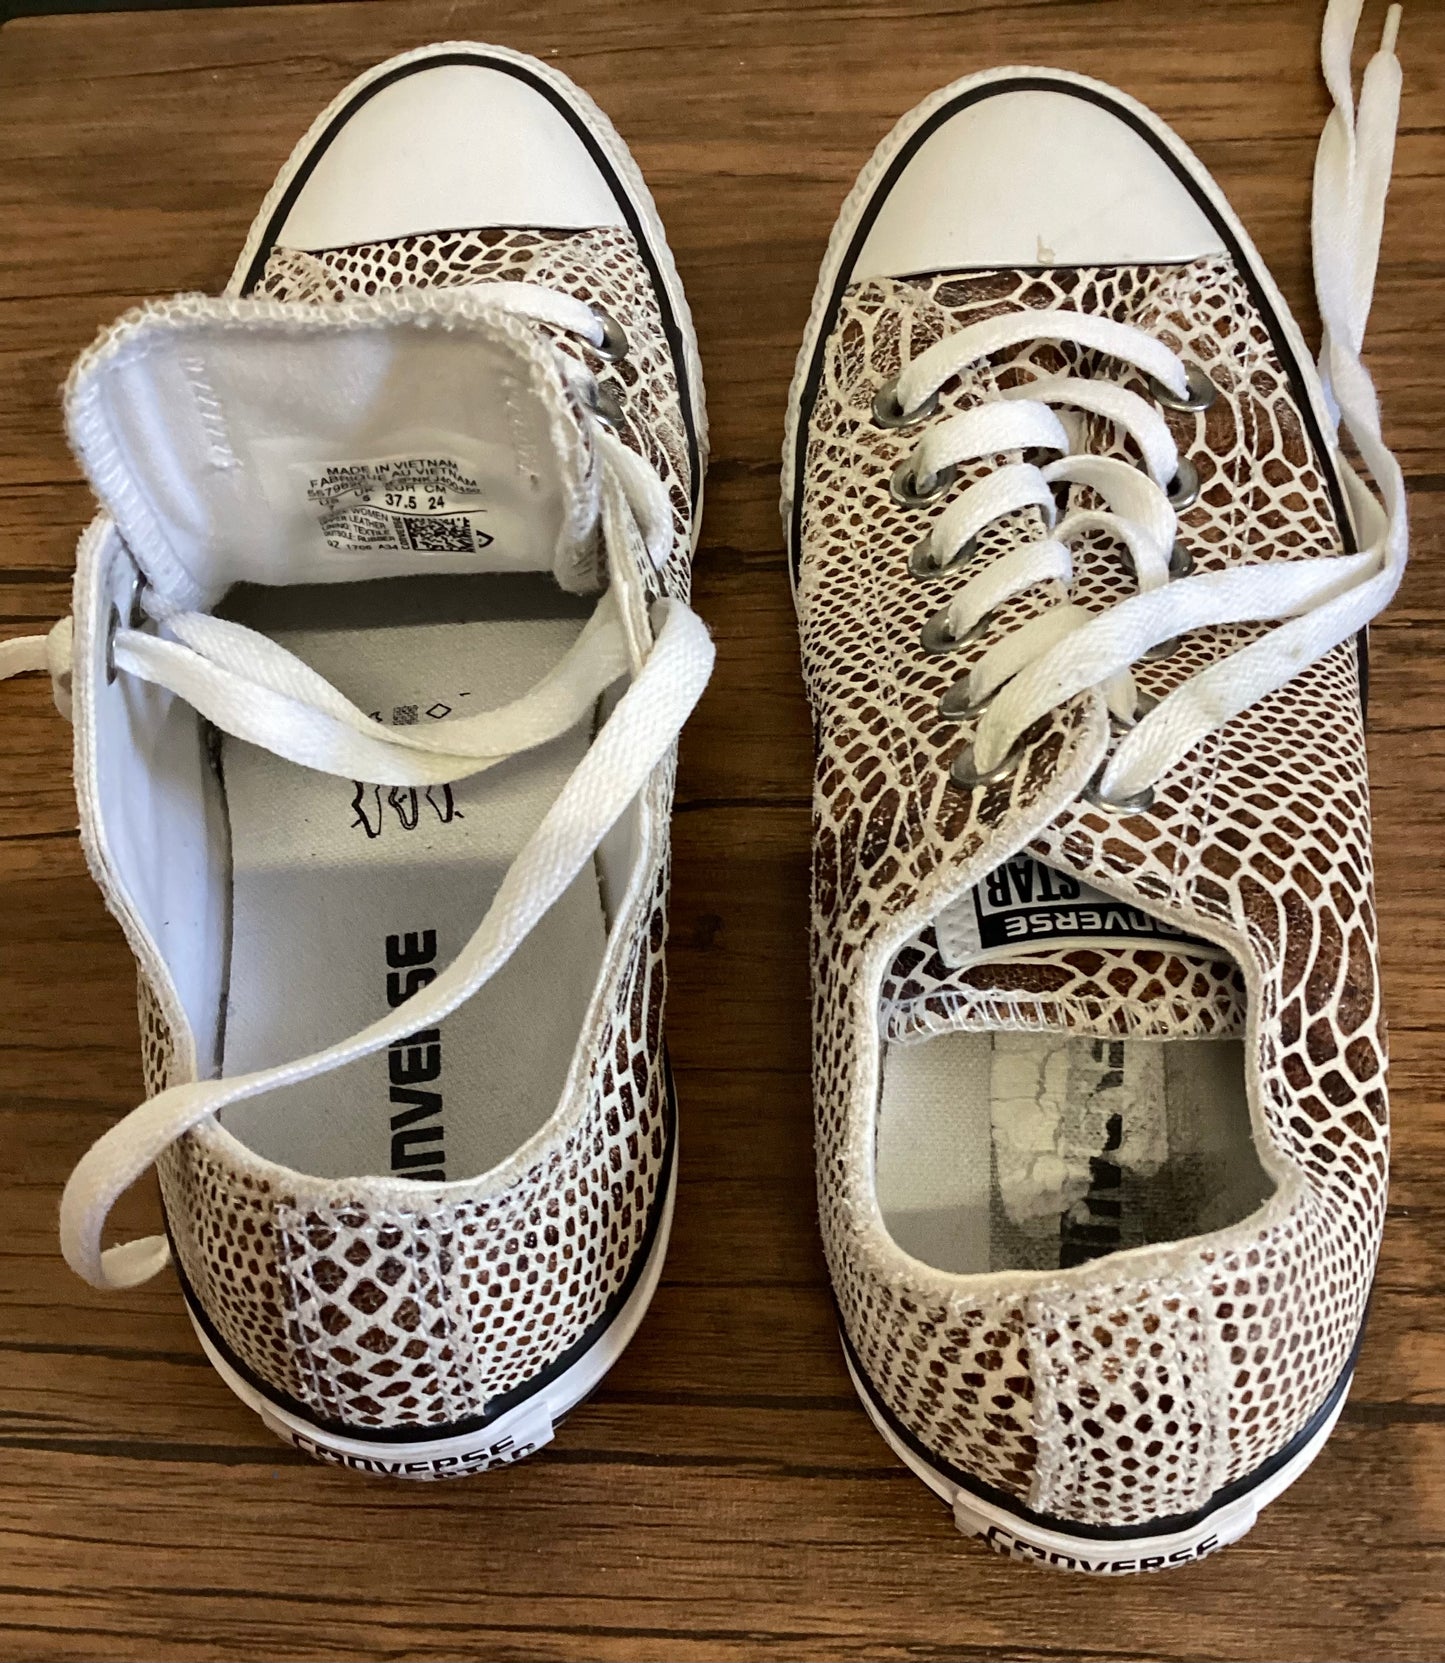 Converse Snakeskin print low top trainers, UK size 5